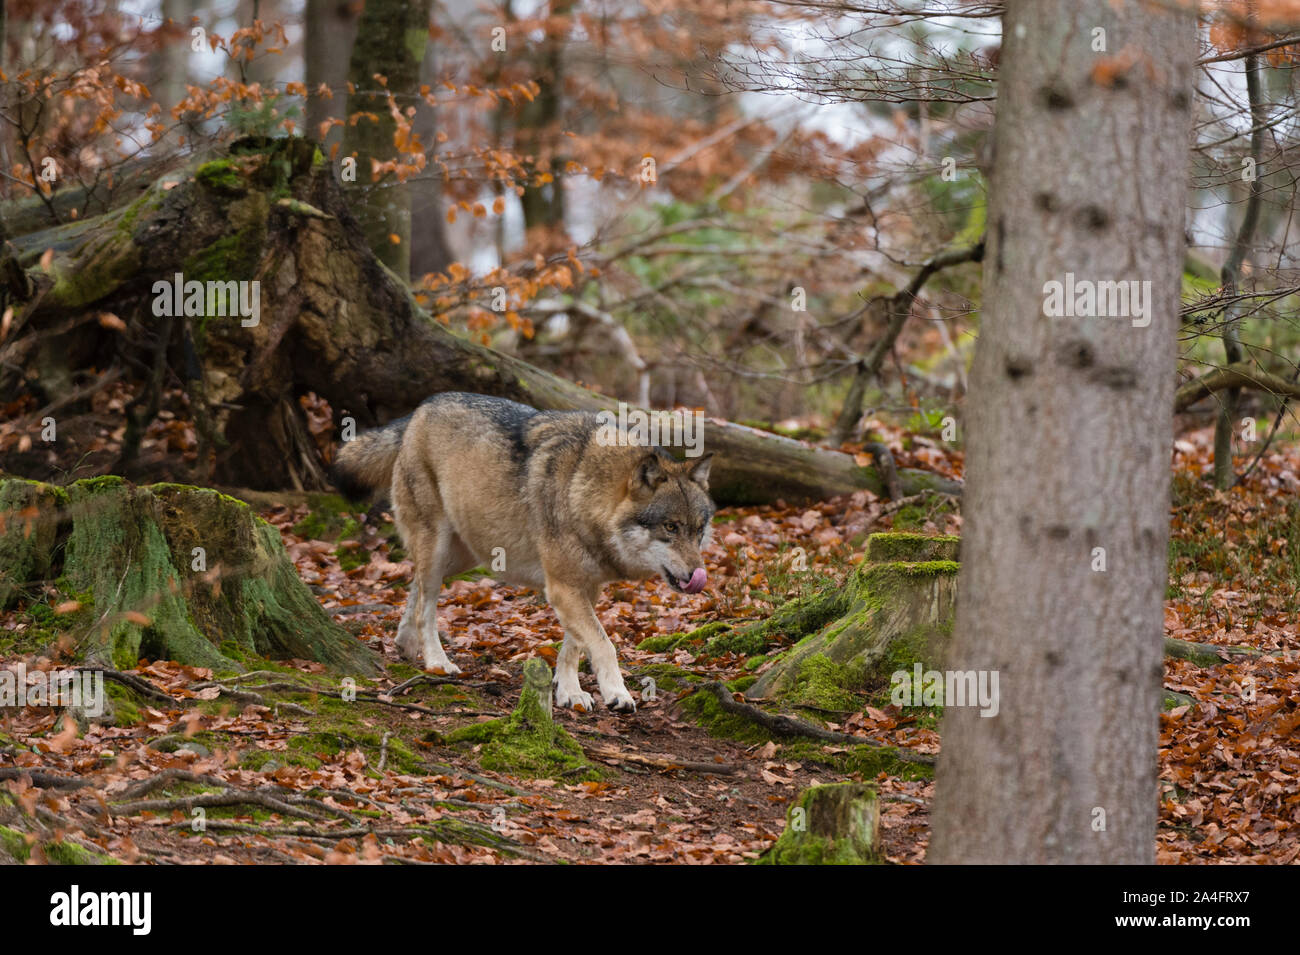 Gray wolf (Canis lupus), Bavarian Forest National Park, Bavaria, Germany. Bayerischer Wald National Park has a 200ha area with huge wildlife enclosure Stock Photo